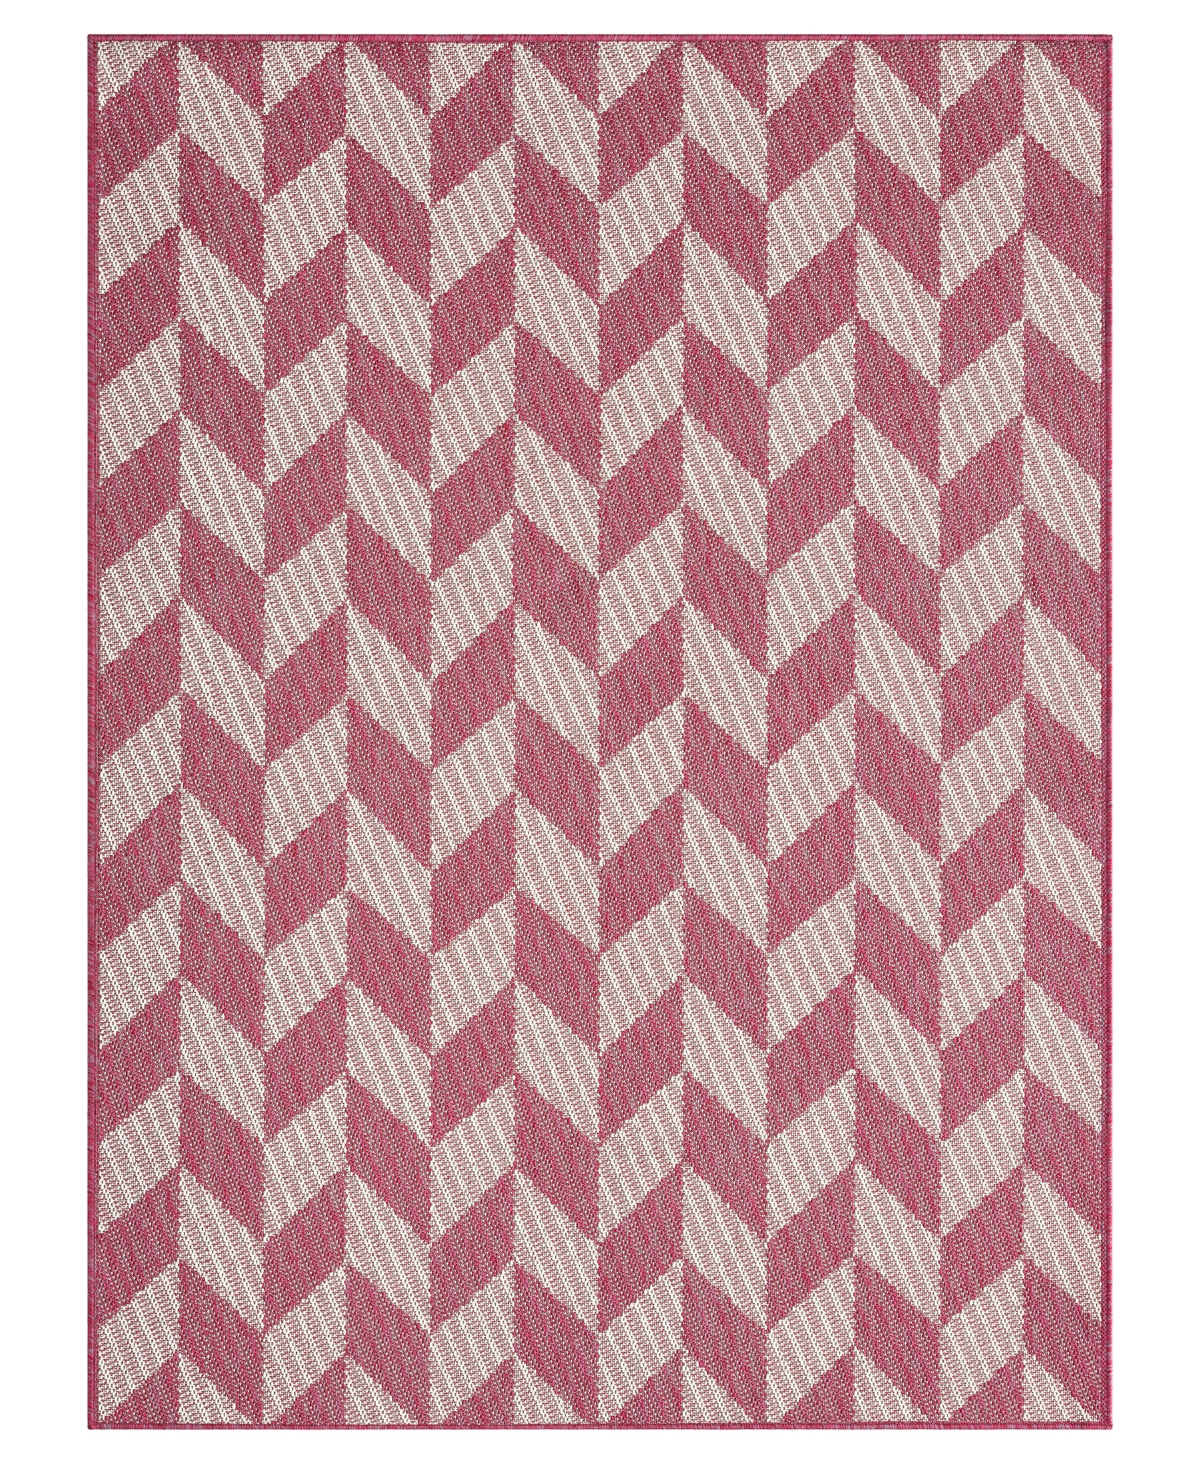 Nicole Miller Patio Country Calla 5'2" X 7'2" Area Rug In Red